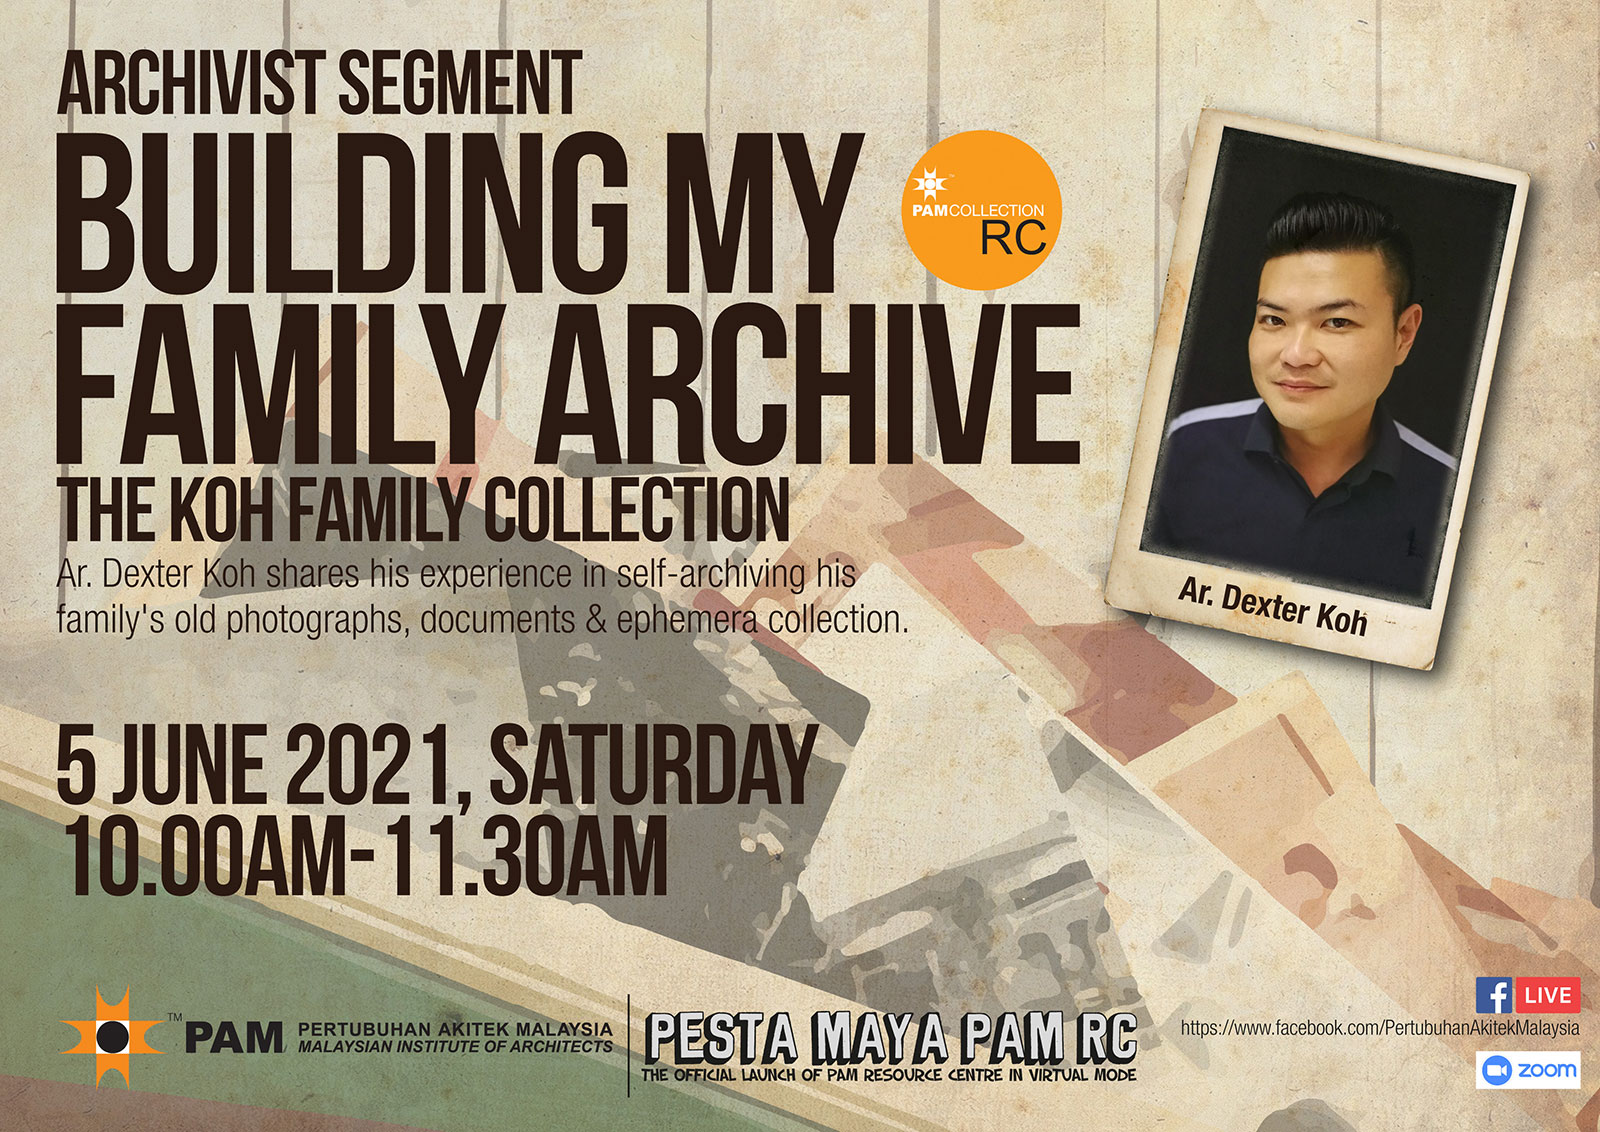 Building My Family Archive: The Koh Family Collection